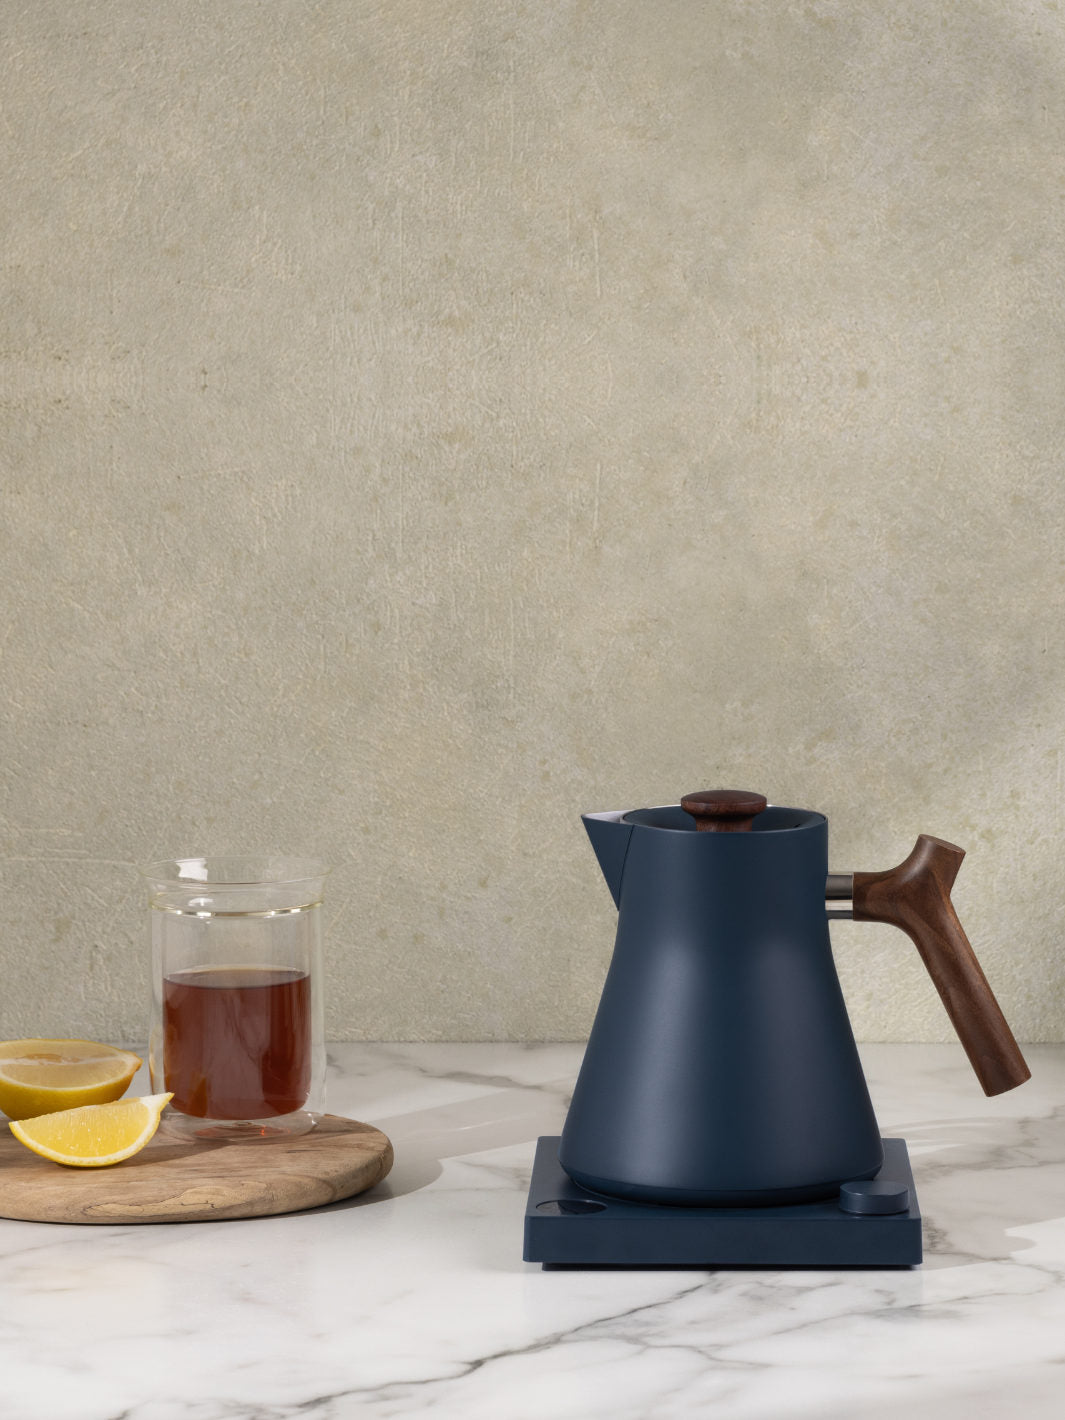 COSORI Electric Tea Kettle for Boiling Water, Russia